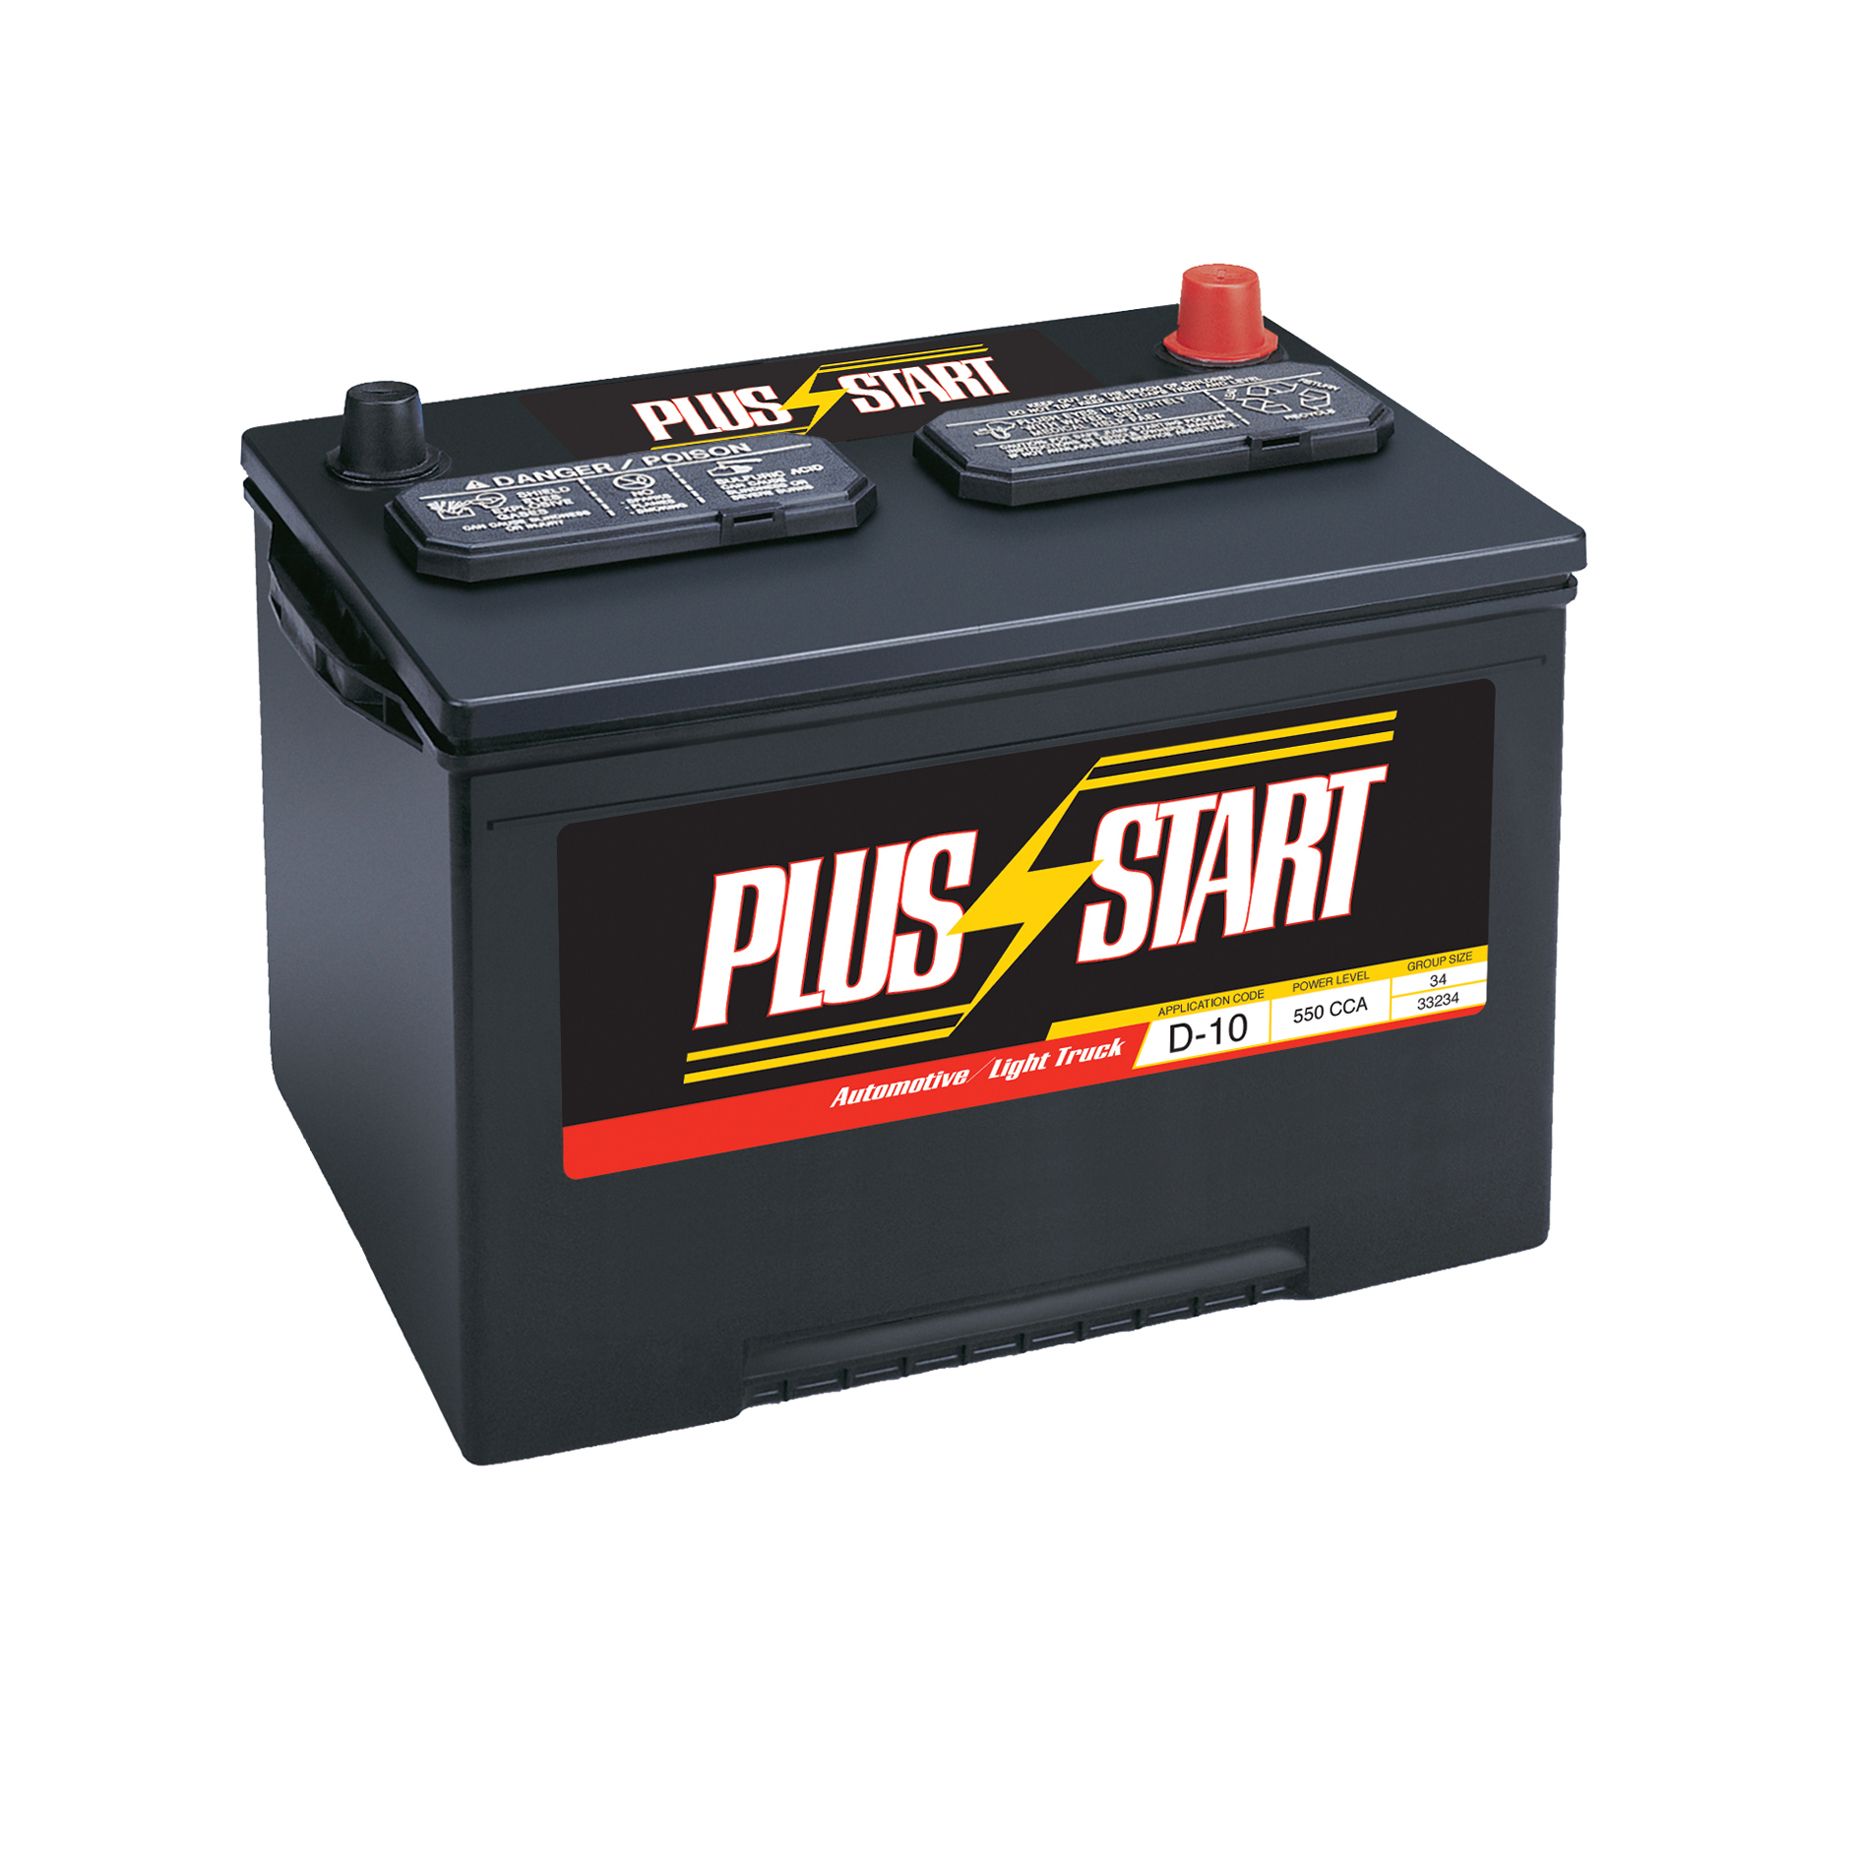 Plus Start Automotive Battery - Group Size JC-34 (Price with Exchange)